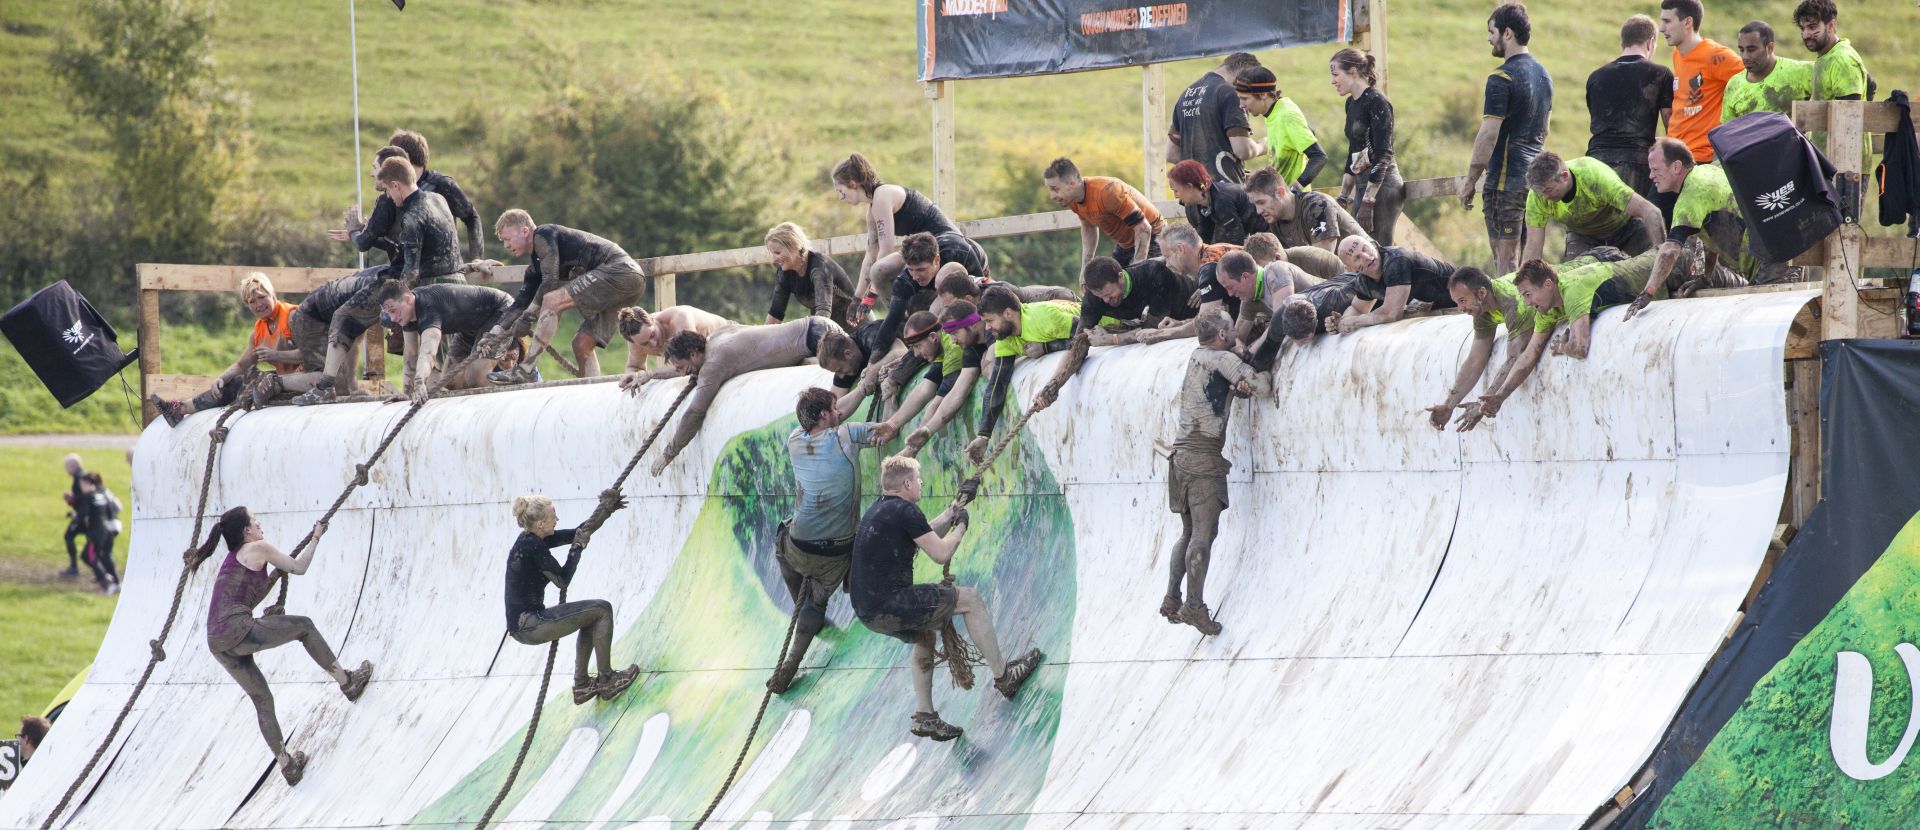 HAMPSHIRE UK - SEPTEMBER 26 2015: Tough Mudder is a team-oriented 18-20 km obstacle course testing strength and mental grit. It is not a timed race but a team challenge with world-class obstacles.